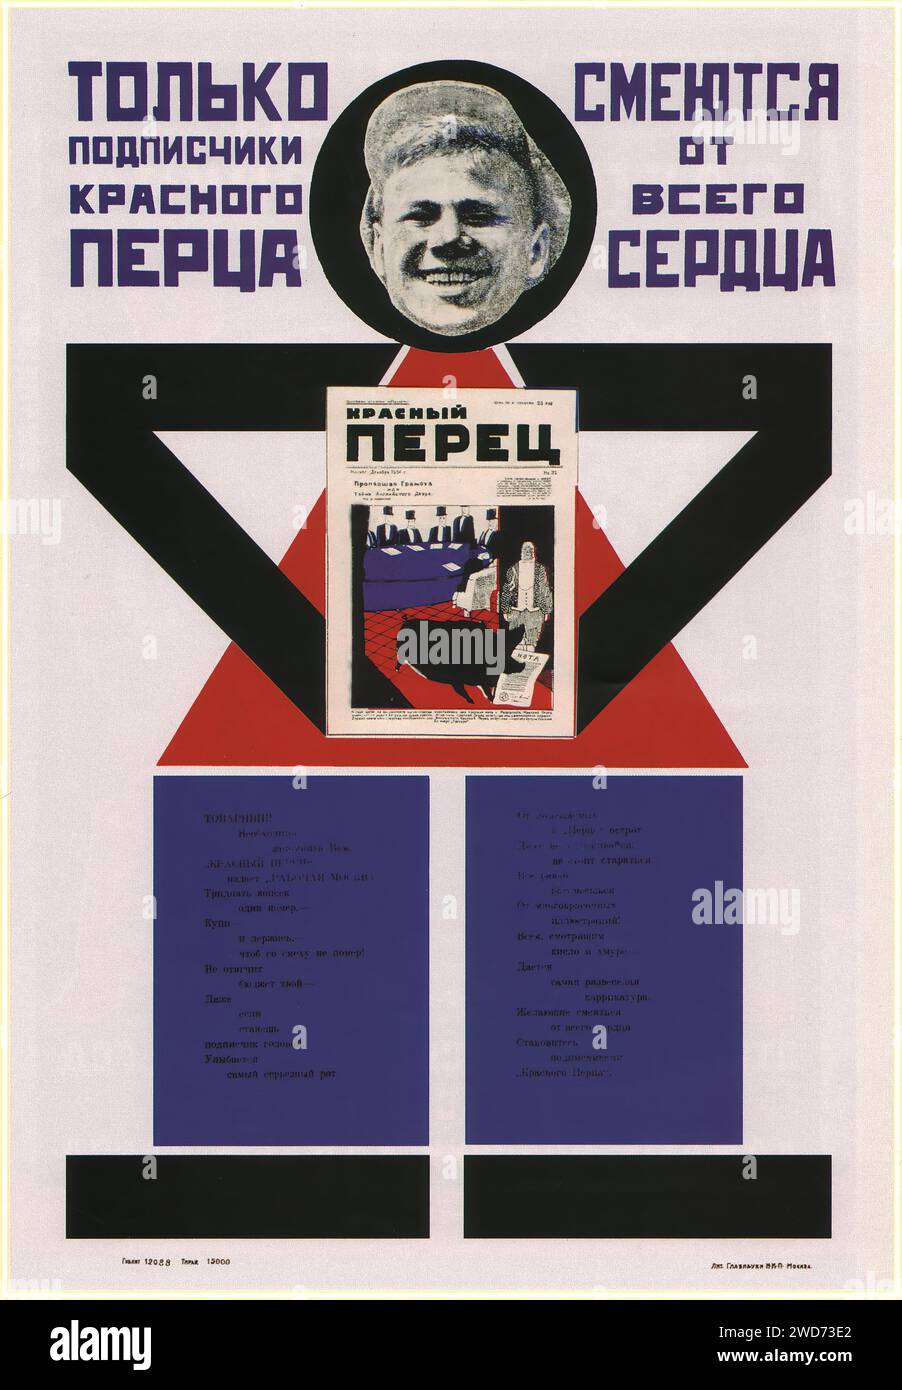 Vladimir Mayakovsky, Varvara Stepanova. Krasny Perets magazine ad. 1925 - Vintage Soviet Advertising and propaganda - 'REMEMBER GIZ! A MARK OF KNOWLEDGE AND LIGHT! EVERYONE SHOULD KNOW THE ADDRESSES OF STORES AND WAREHOUSES State Publishing House' This poster includes a book with a gear symbolizing knowledge and industry, with a list of addresses for state stores and warehouses. The style is propagandistic with bold lettering and a stark color contrast, reminiscent of Soviet graphic design. Stock Photo